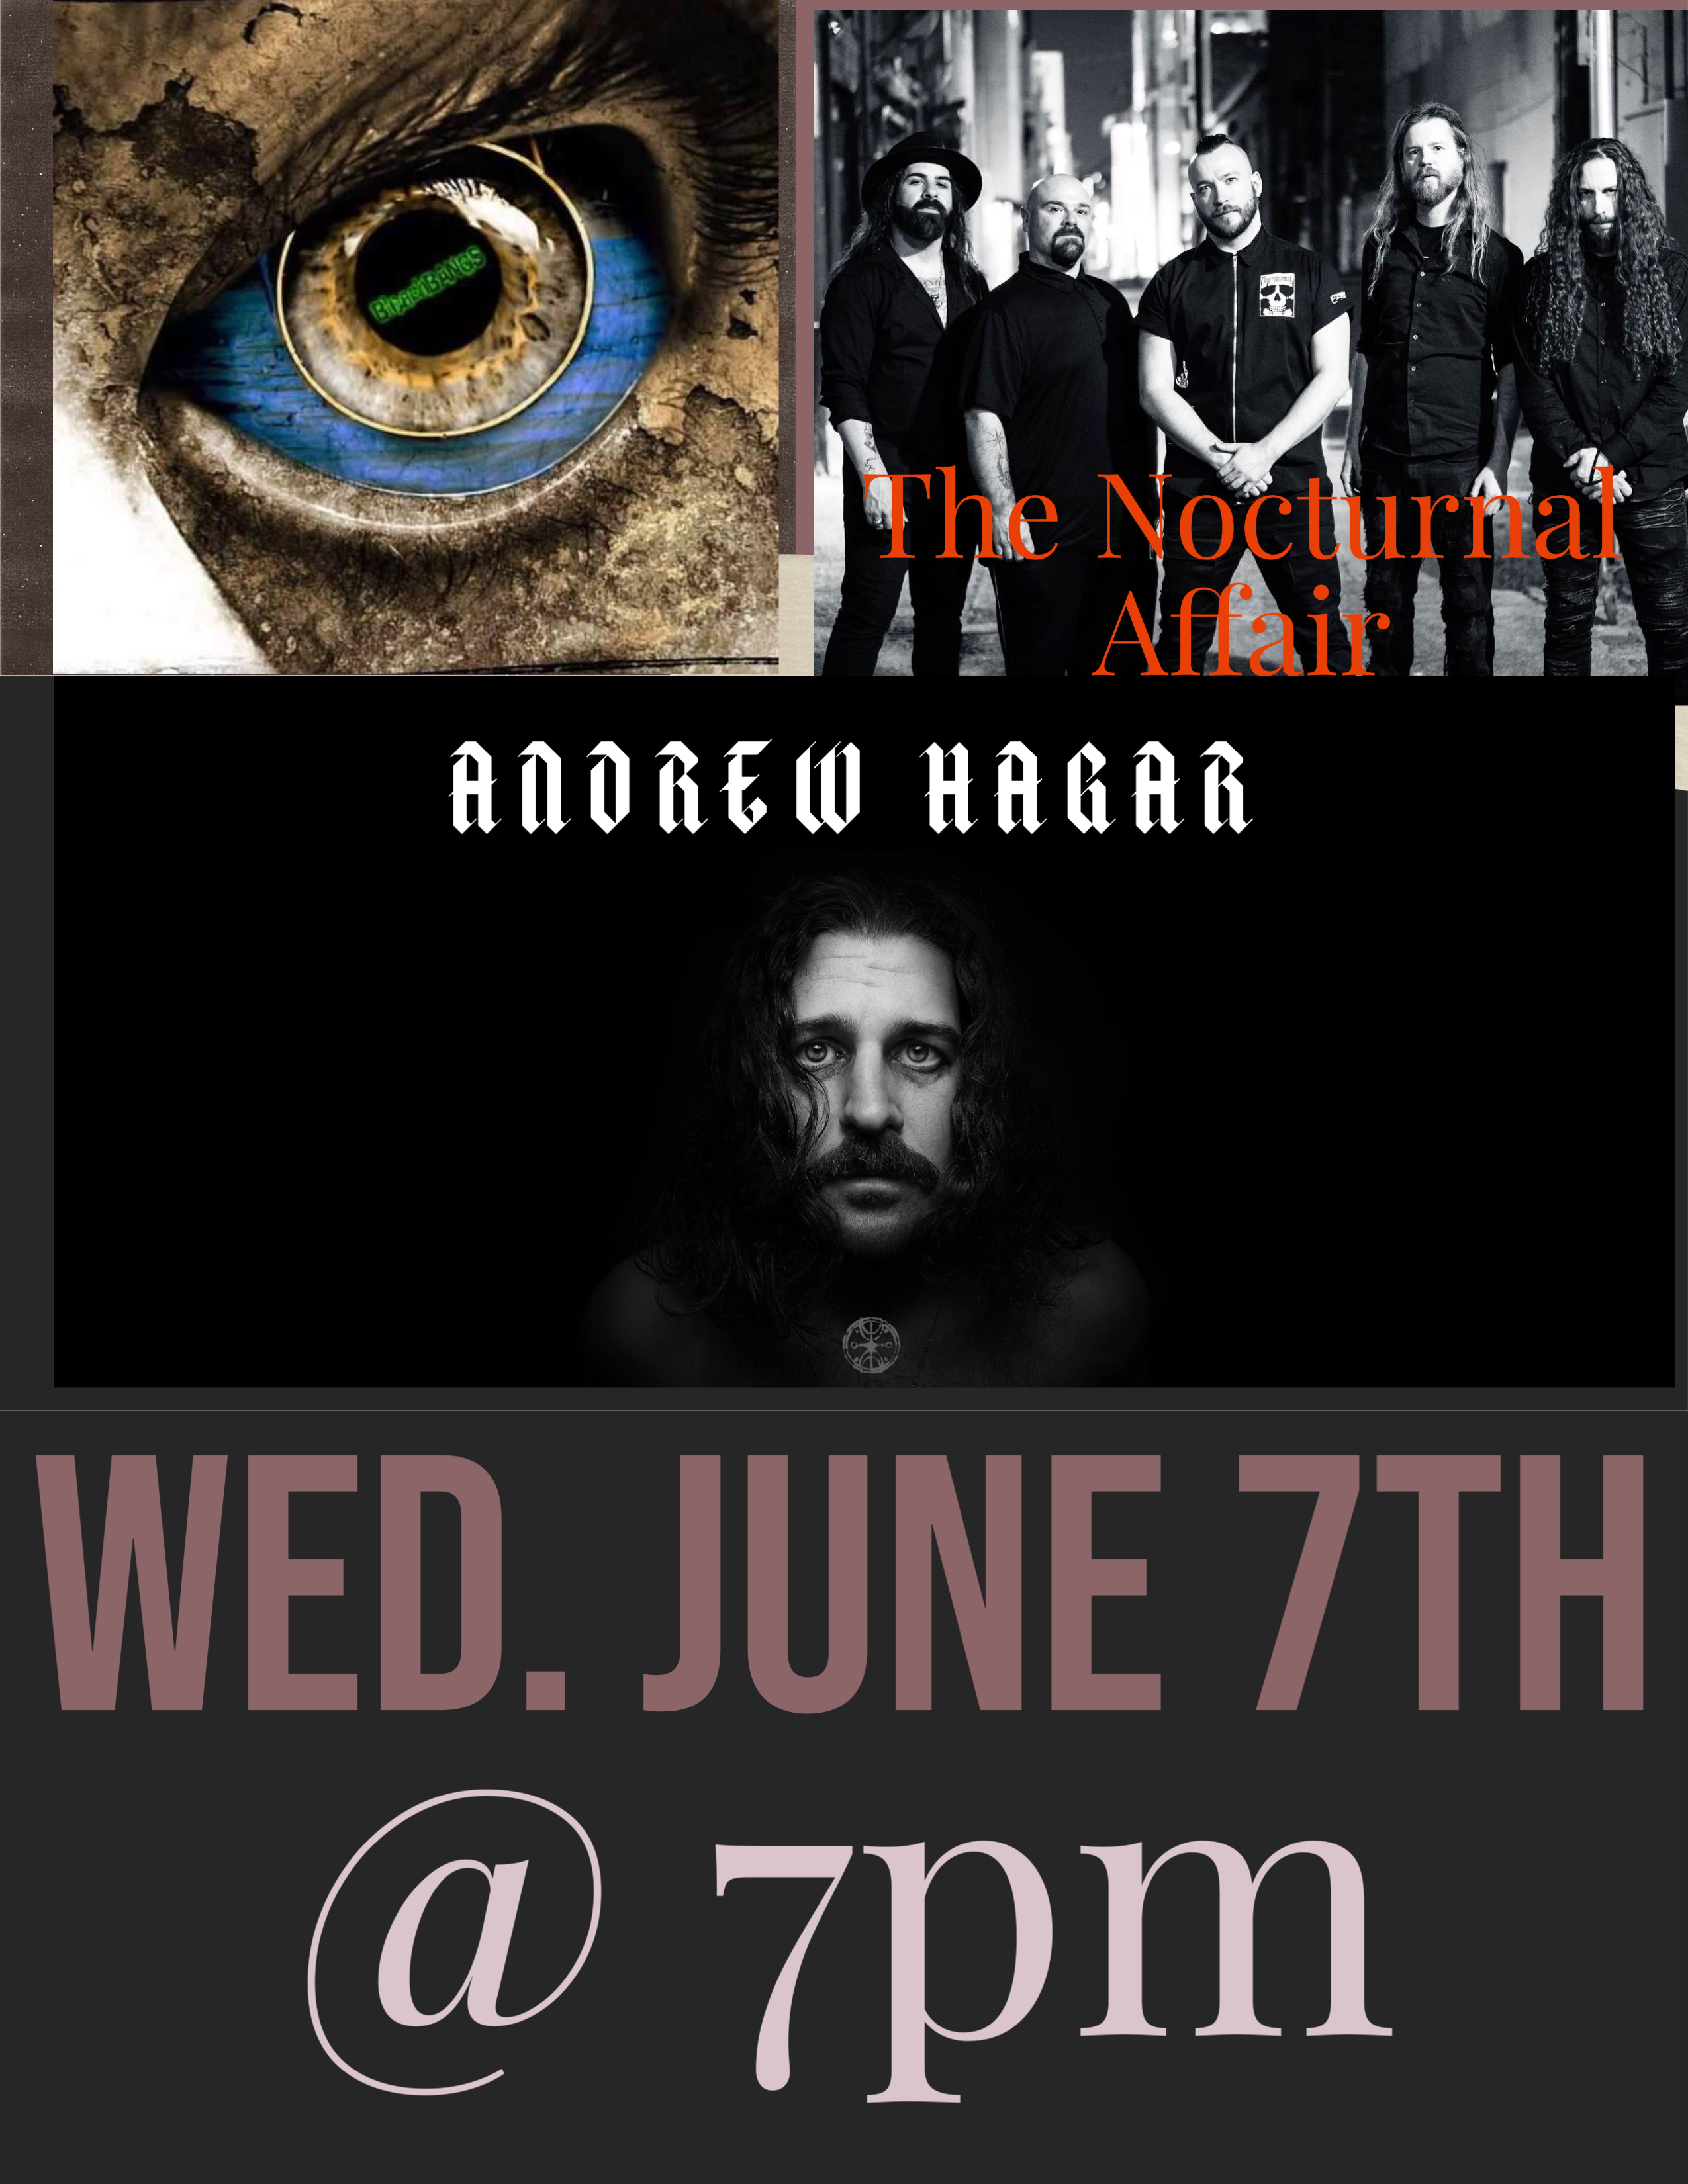 Ep 217 Andrew Hagar and The Nocturnal Affair